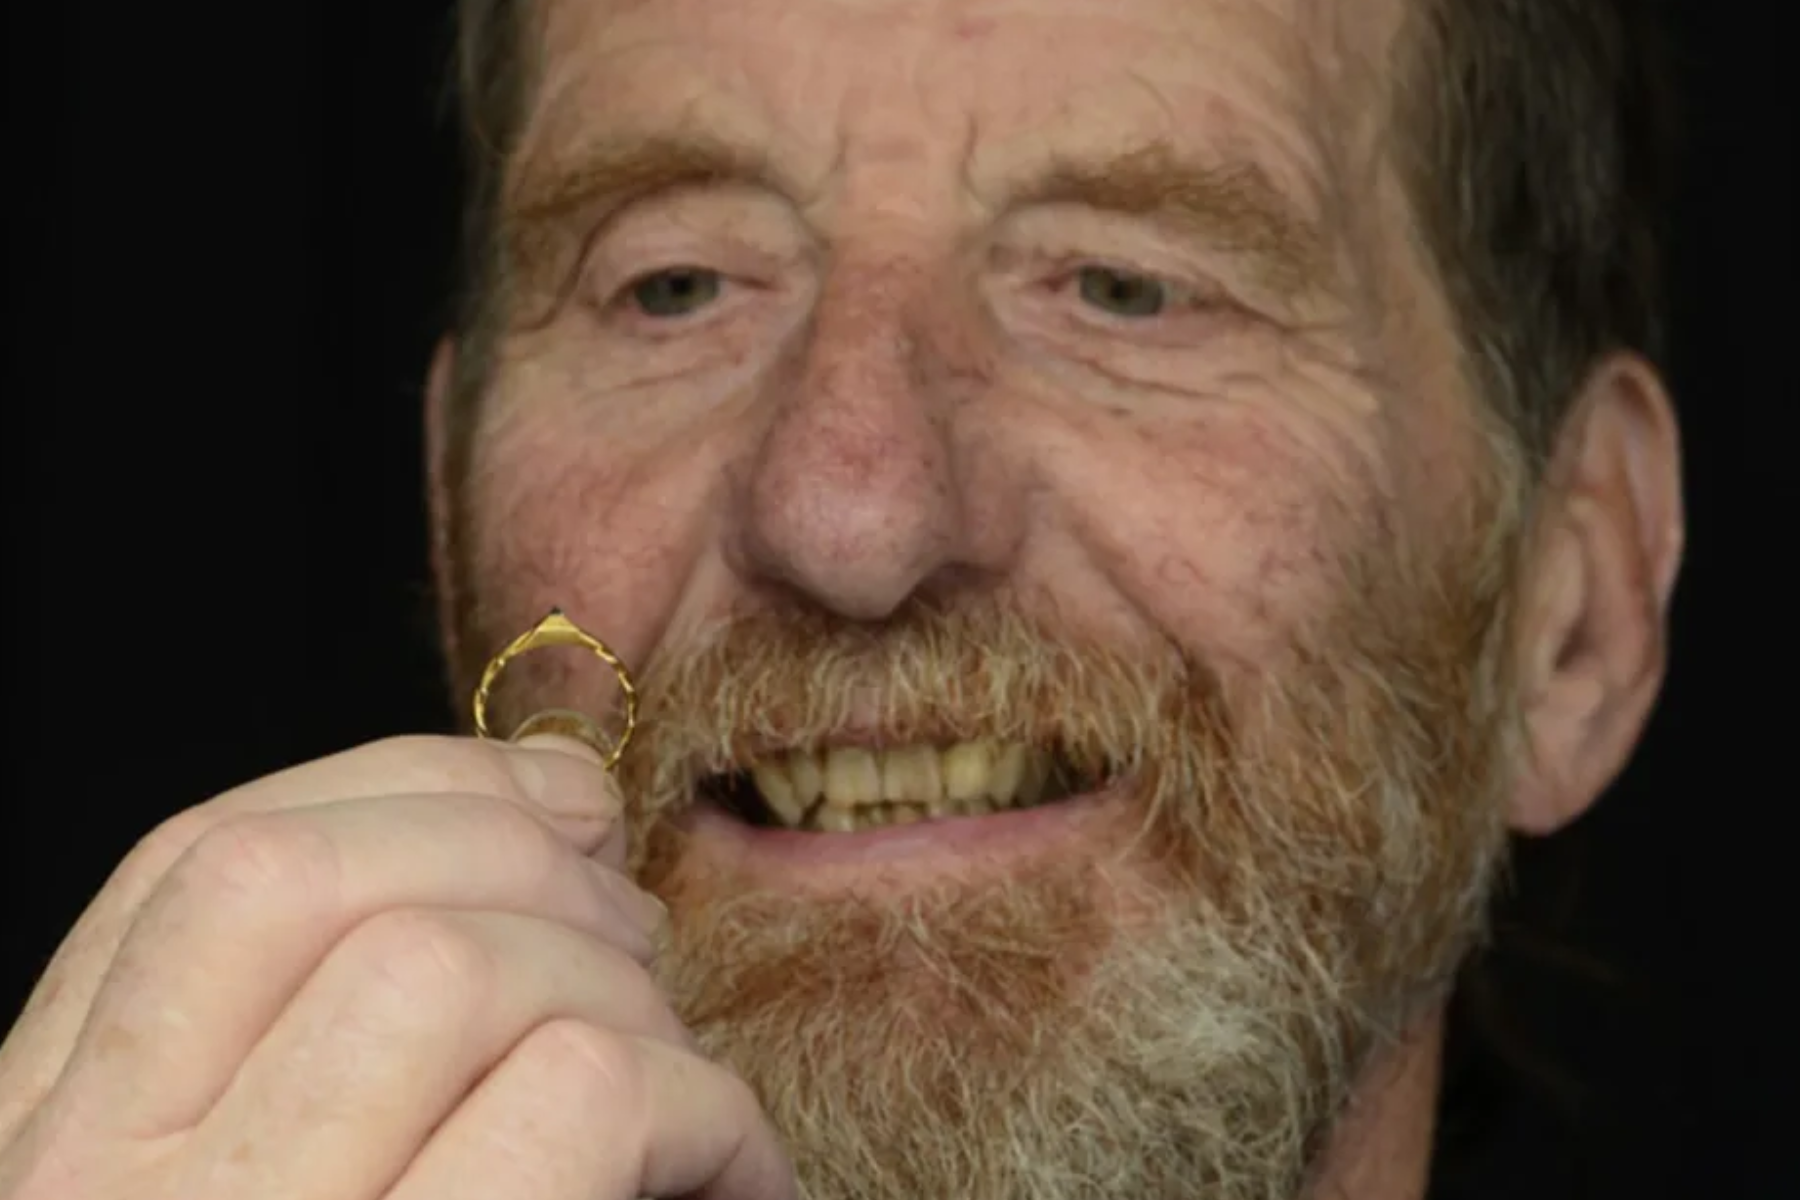 Metal Detectorist Discovers Medieval Wedding Ring Worth An Estimated $47,000